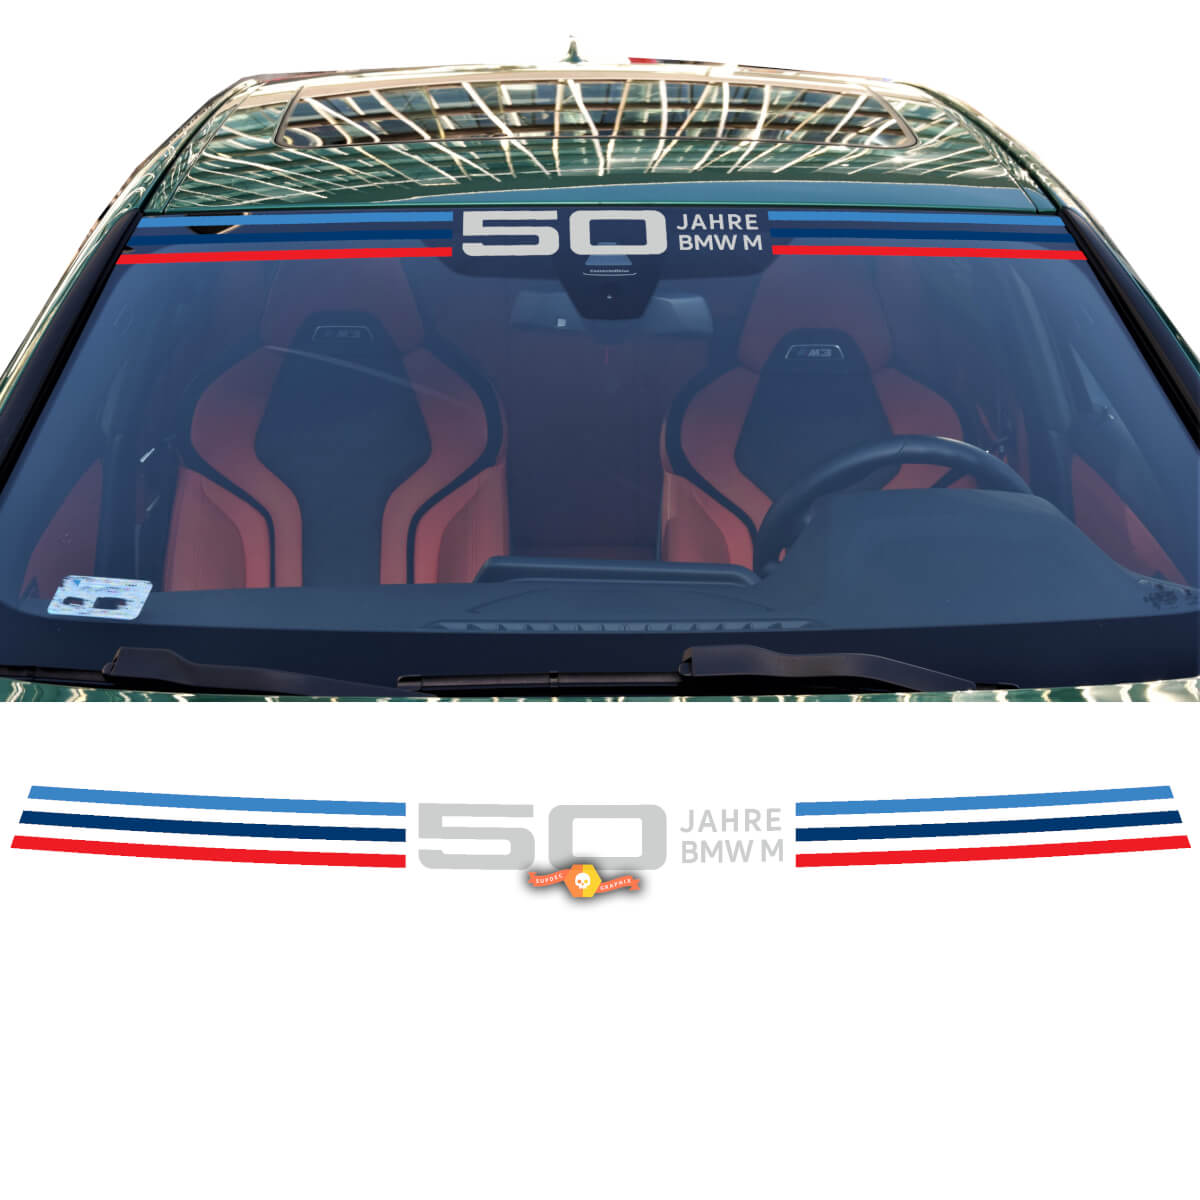 50 Years of M POWER BMW Motorsport 50 Jahre BMW M Decal Sticker for Windshield or Rear Window fit to BMW G series
